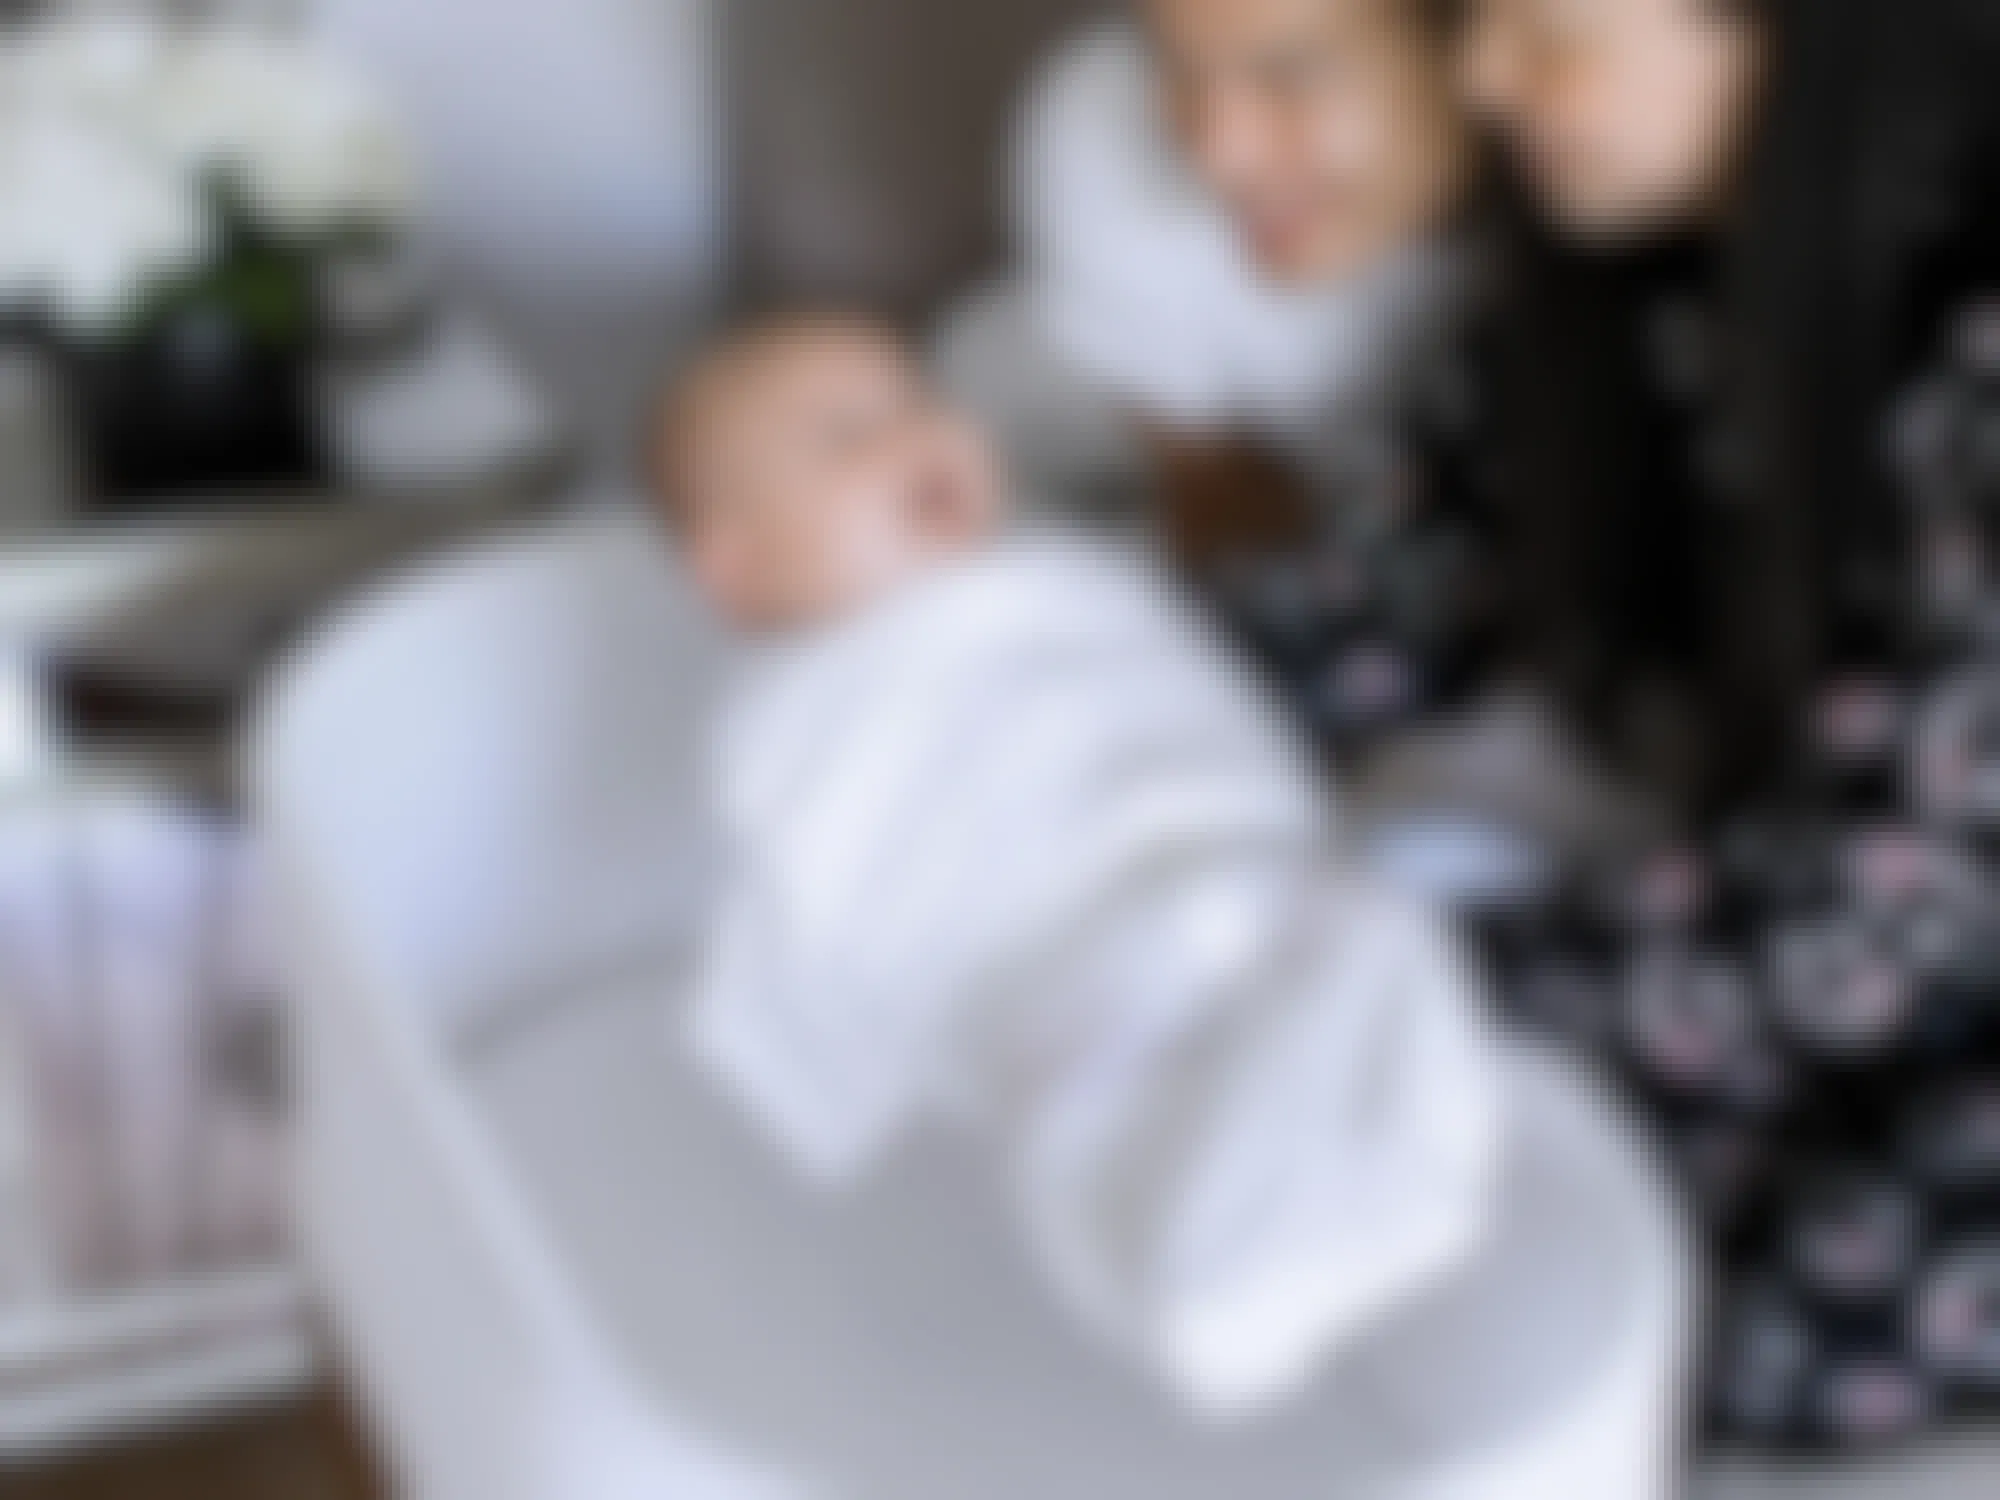 Parents placing their baby into a SNOO Bassinet